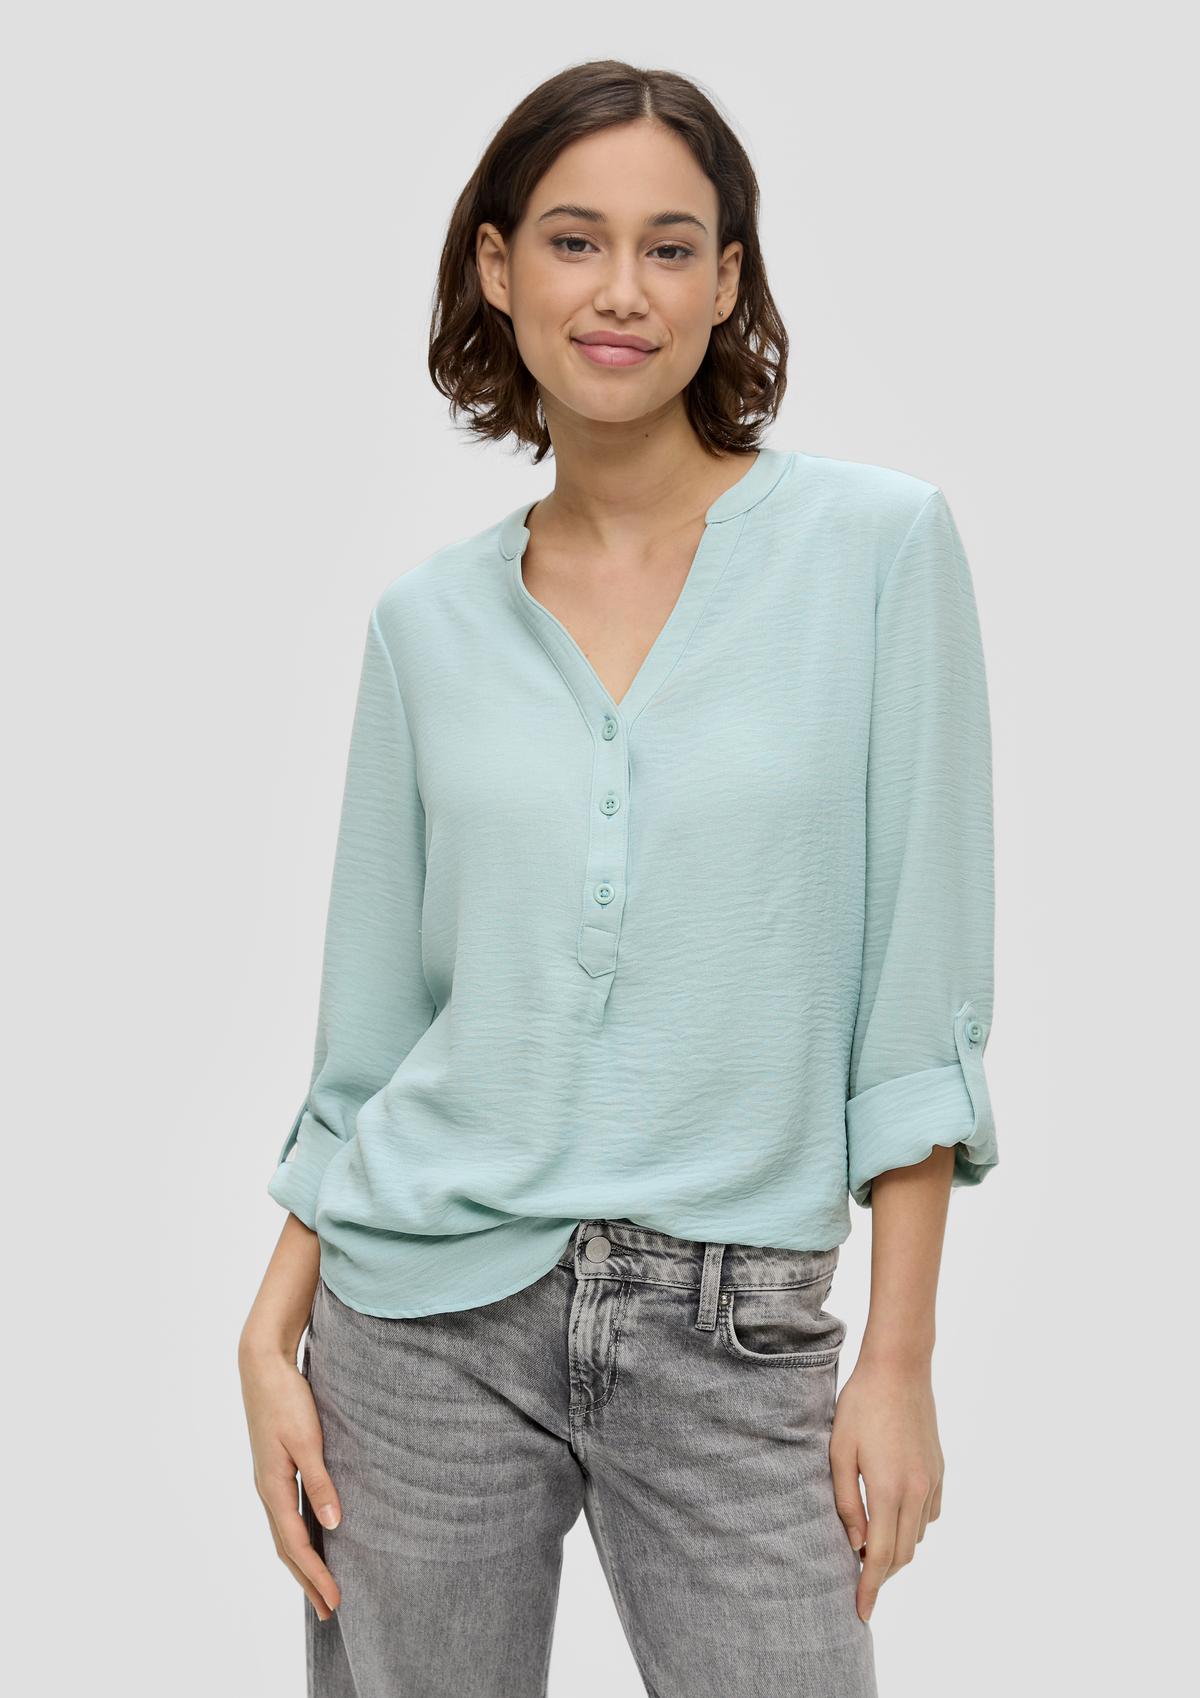 Tunic blouse with mid-length sleeves